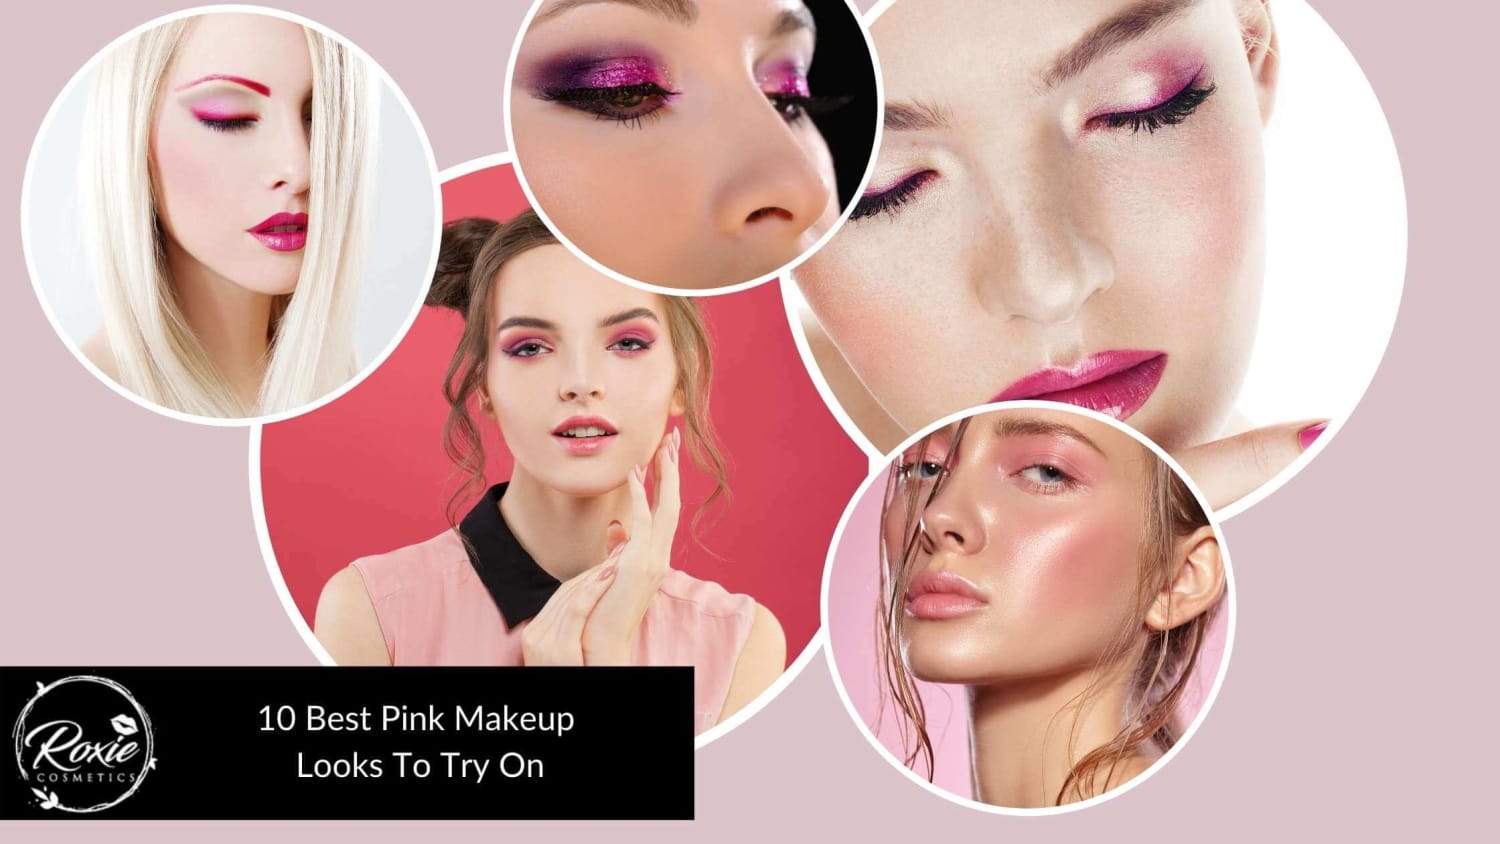 10 Best Pink Makeup Looks To Try On